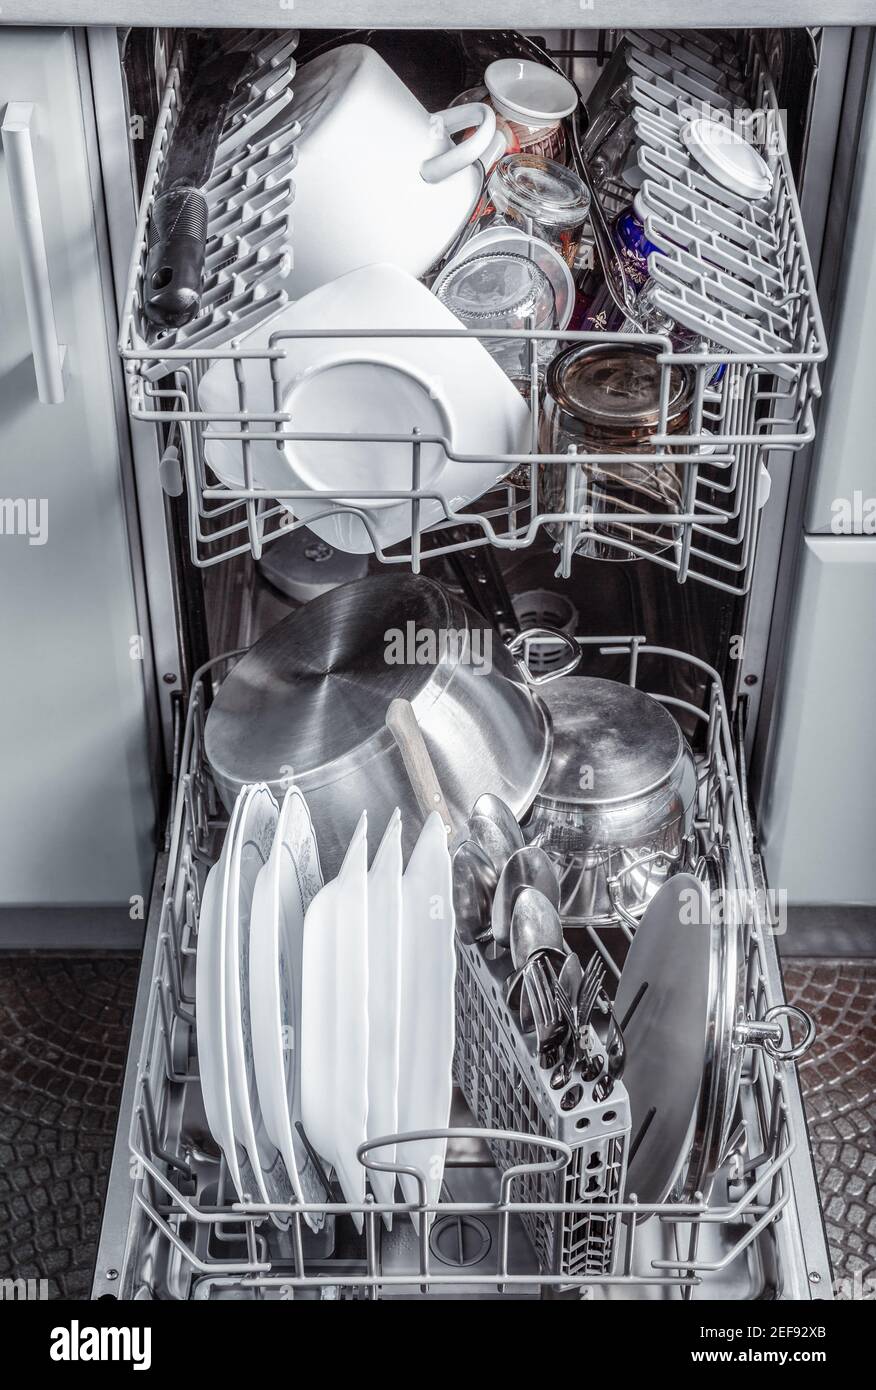 Clean dishes and utensils in an open dishwasher Stock Photo - Alamy